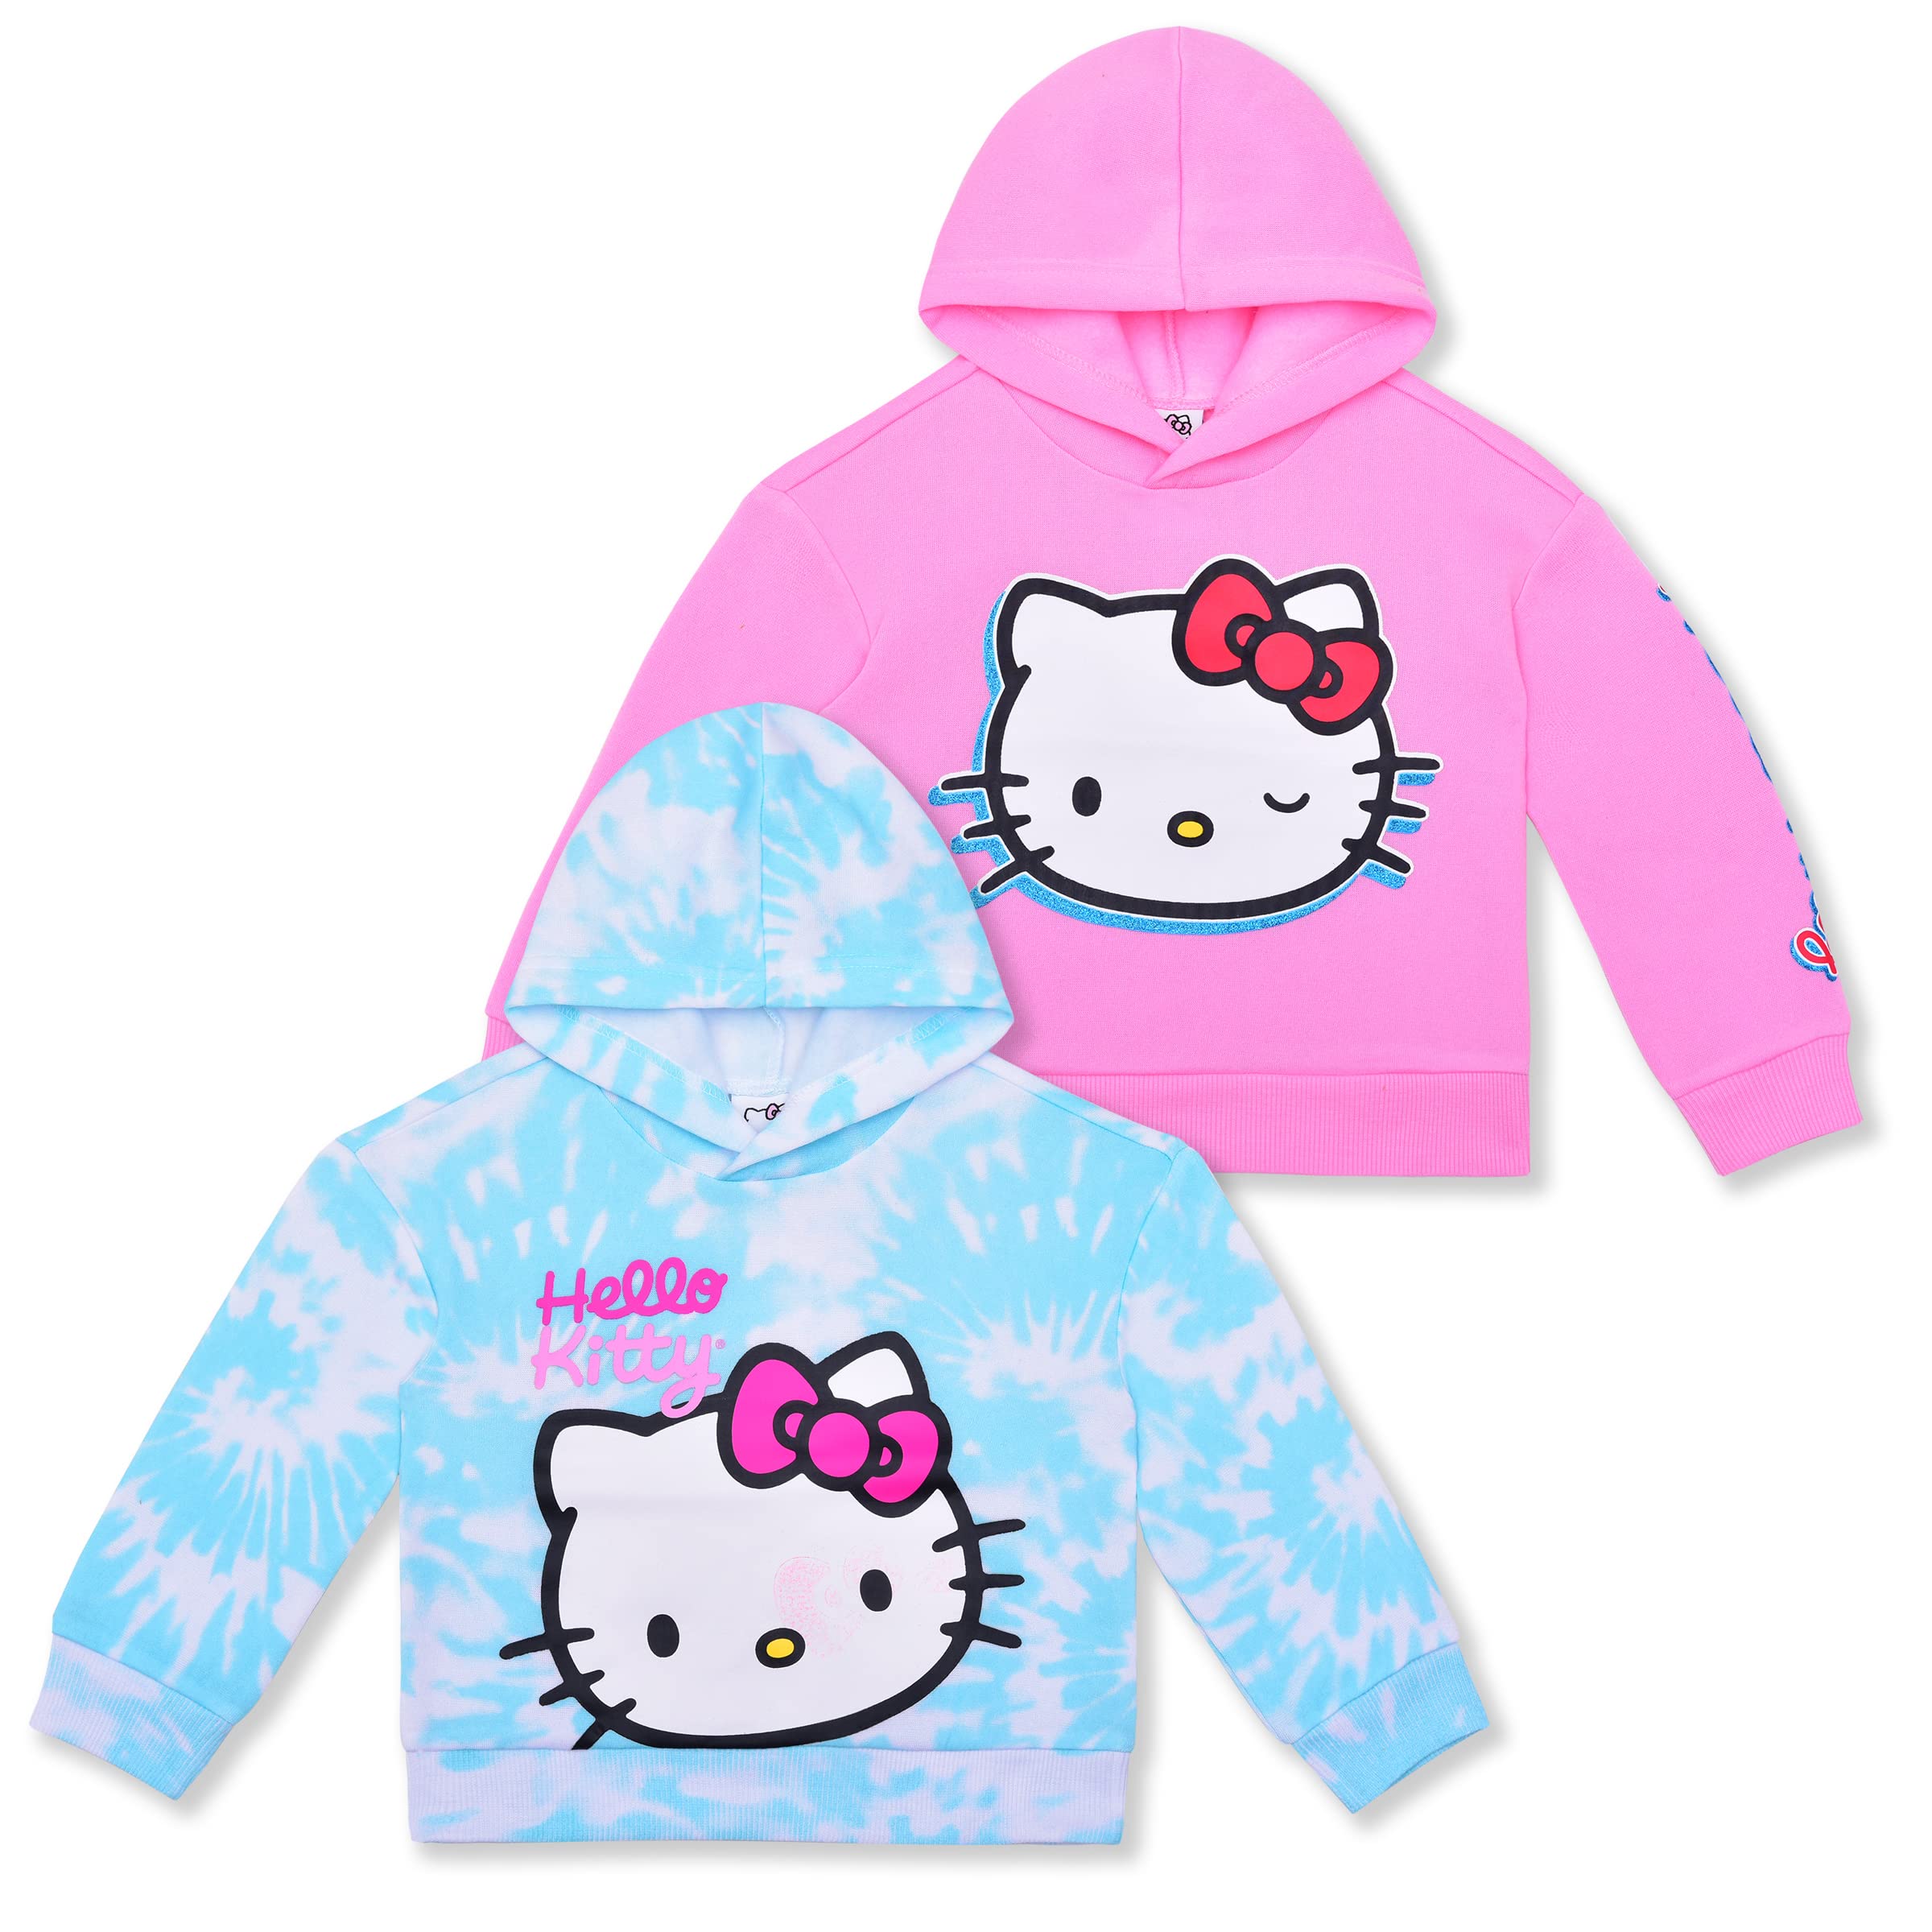 Hello Kitty Girls 2 Pack Hoodie for Infant, Toddler, Little and Big Kids – Blue/Pink